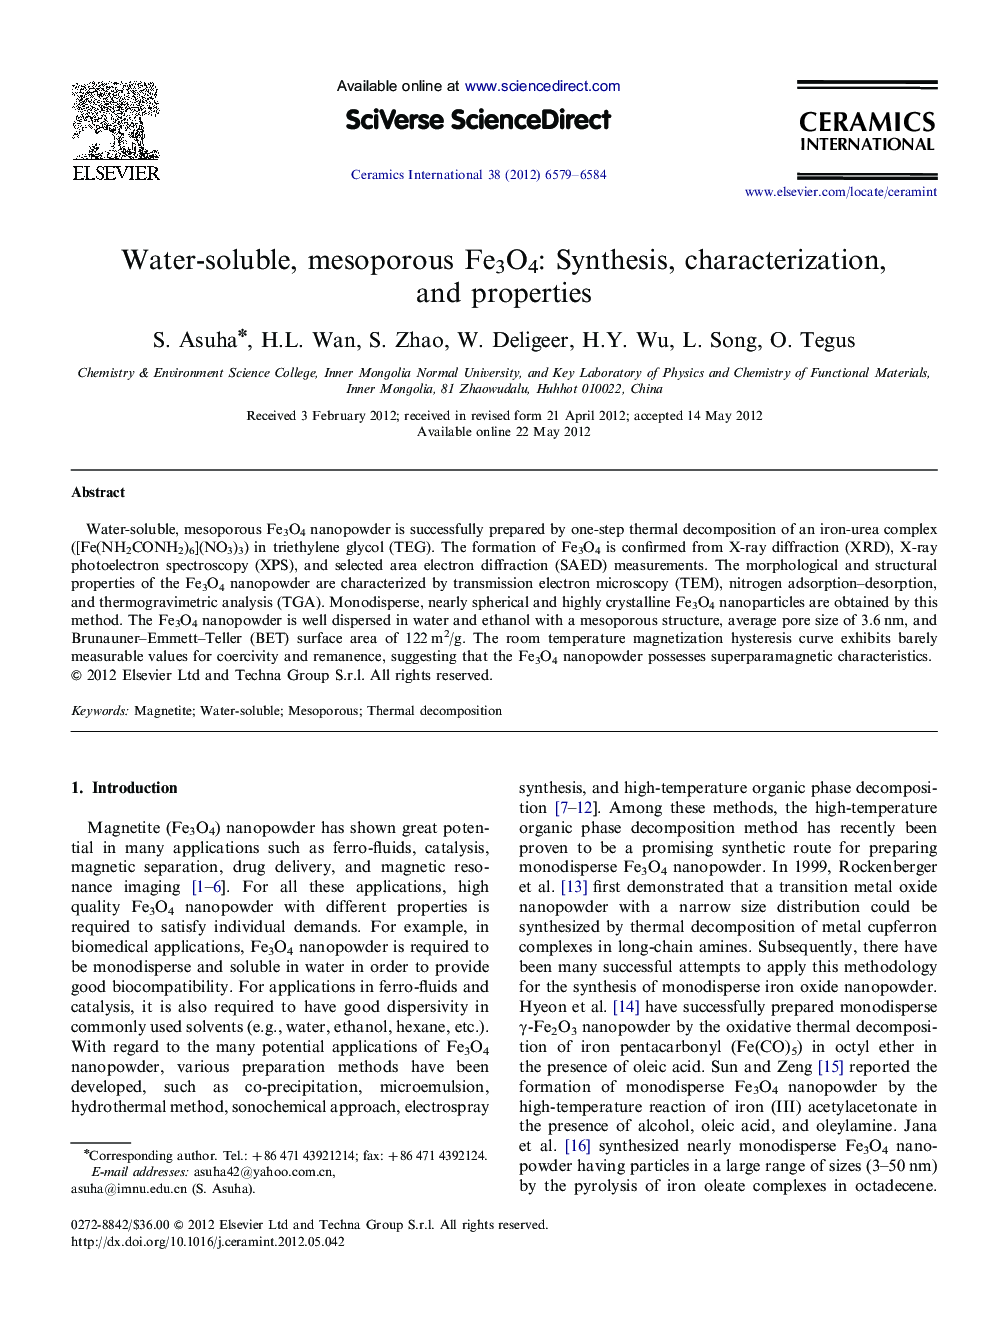 Water-soluble, mesoporous Fe3O4: Synthesis, characterization, and properties